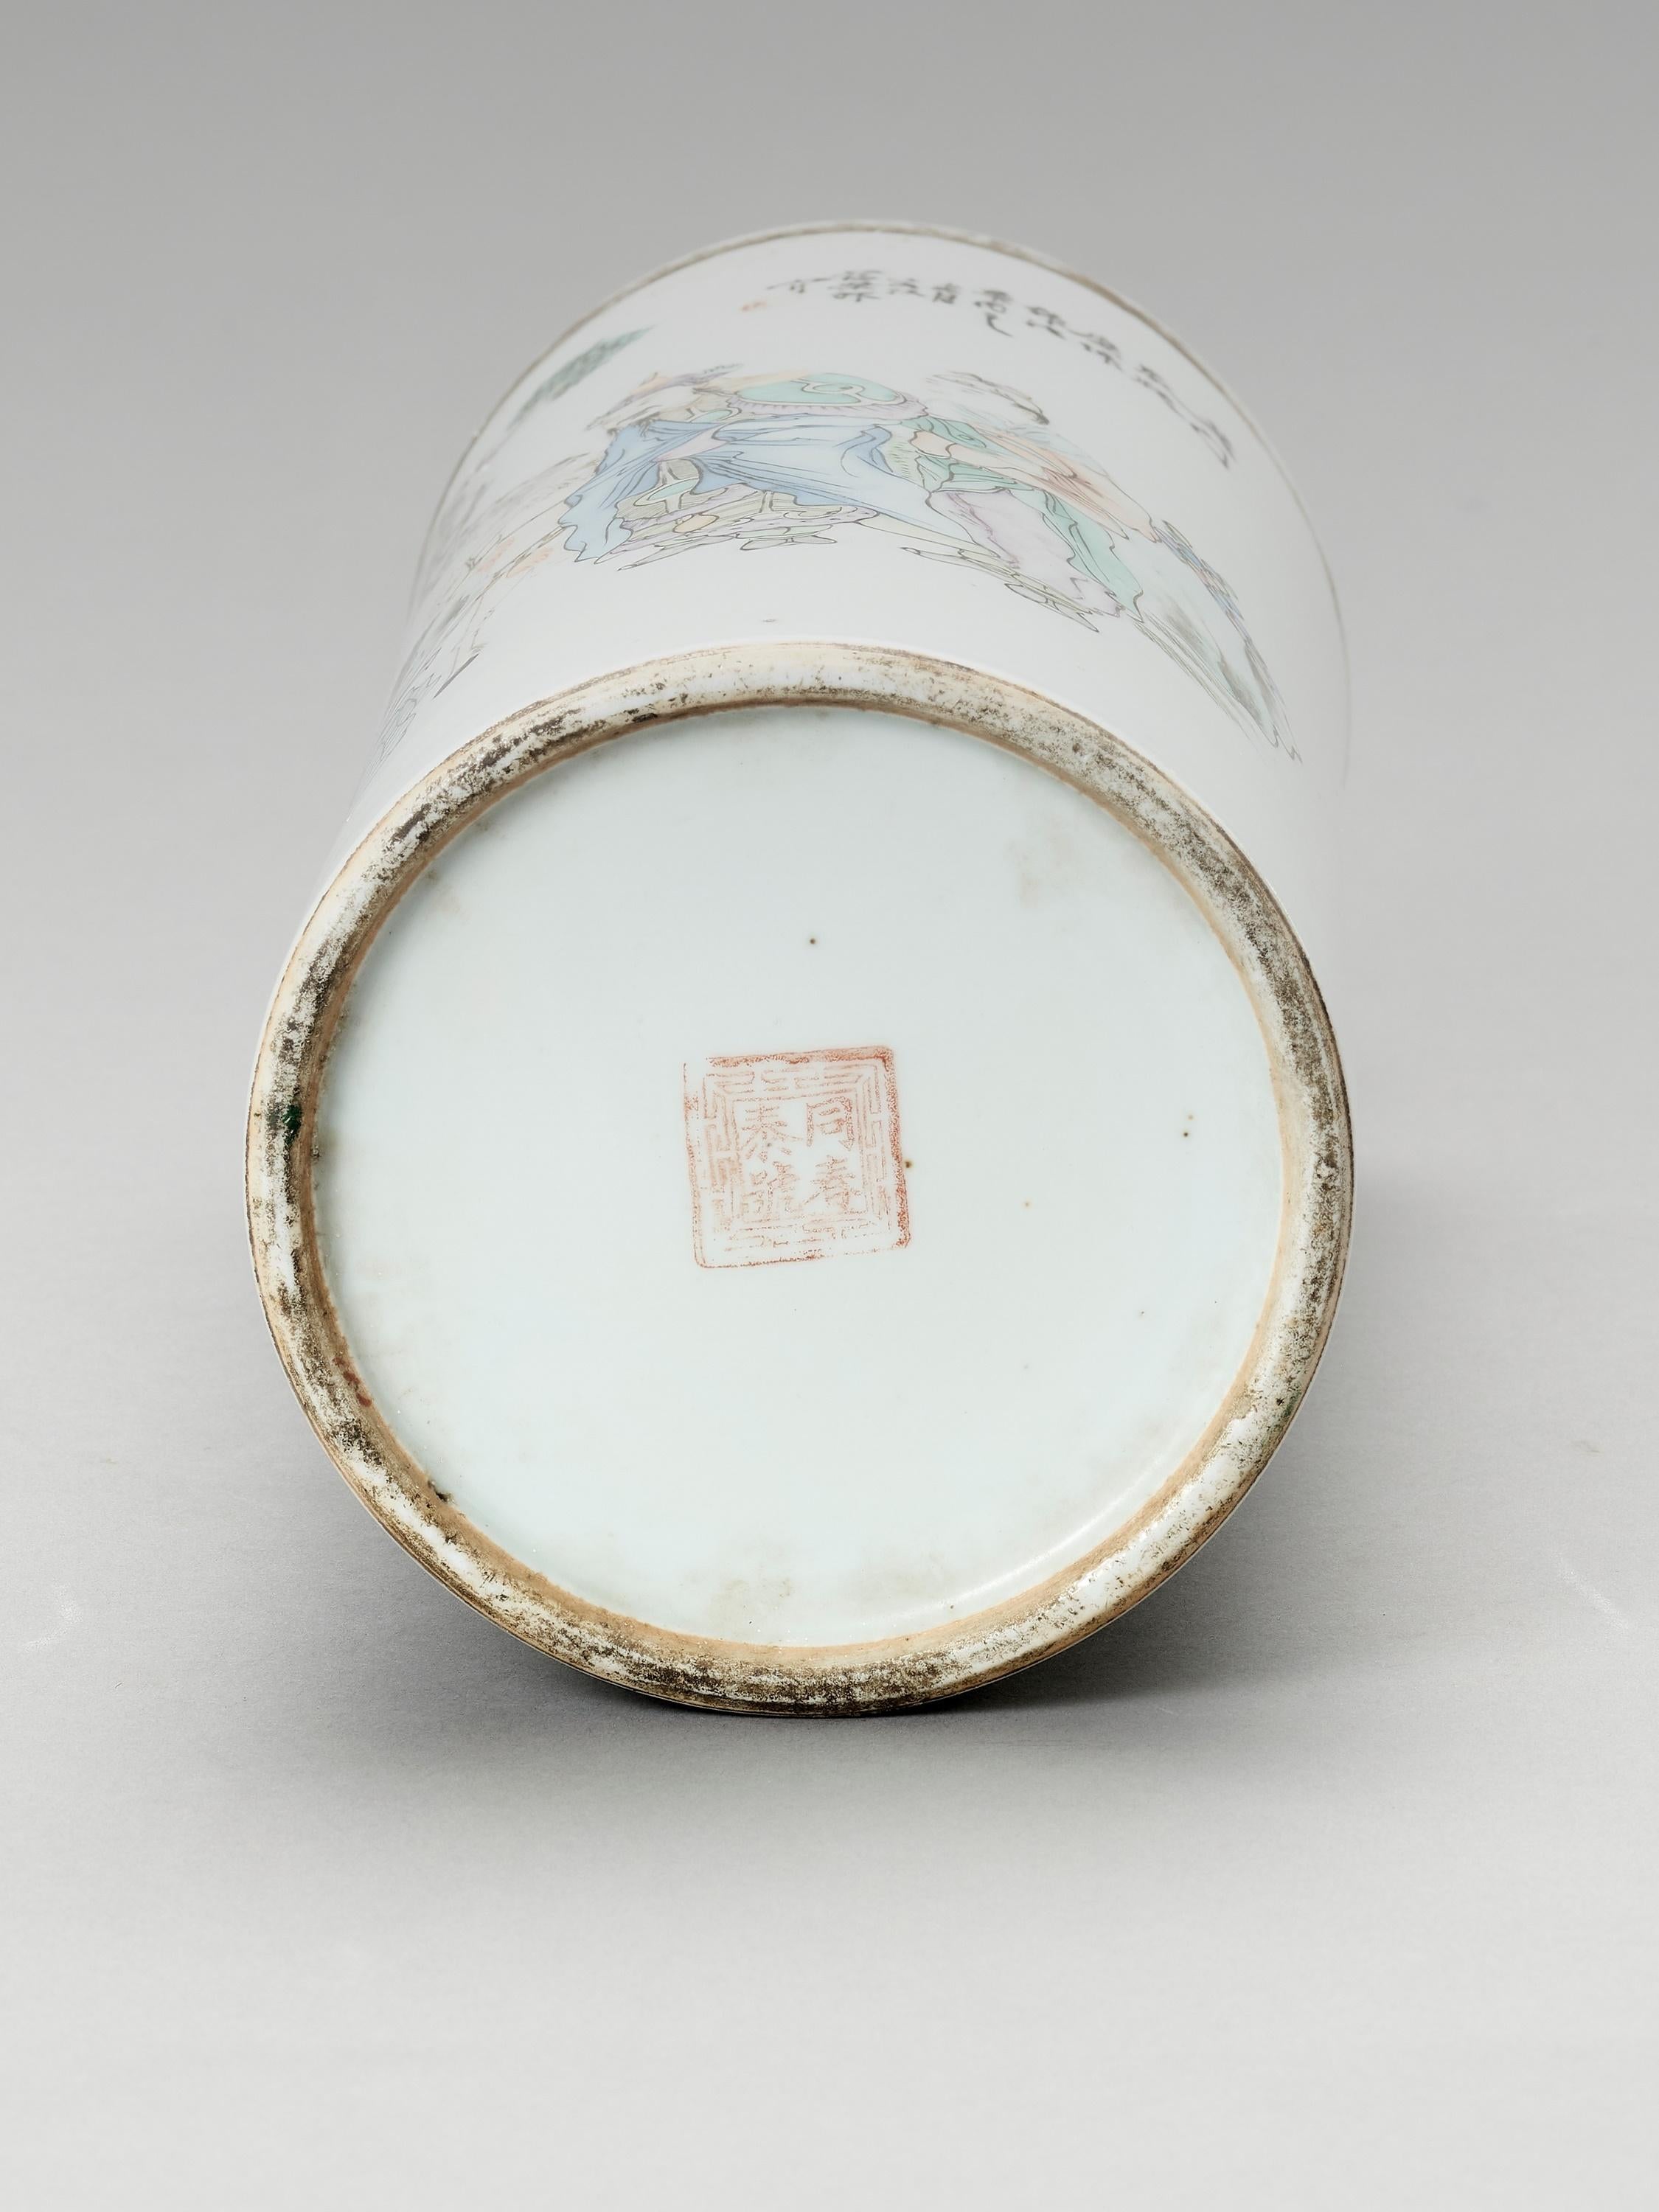 Chinese Enameled Cylindrical Porcelain Vase, Late Qing to Republic, 1900-1950 For Sale 4